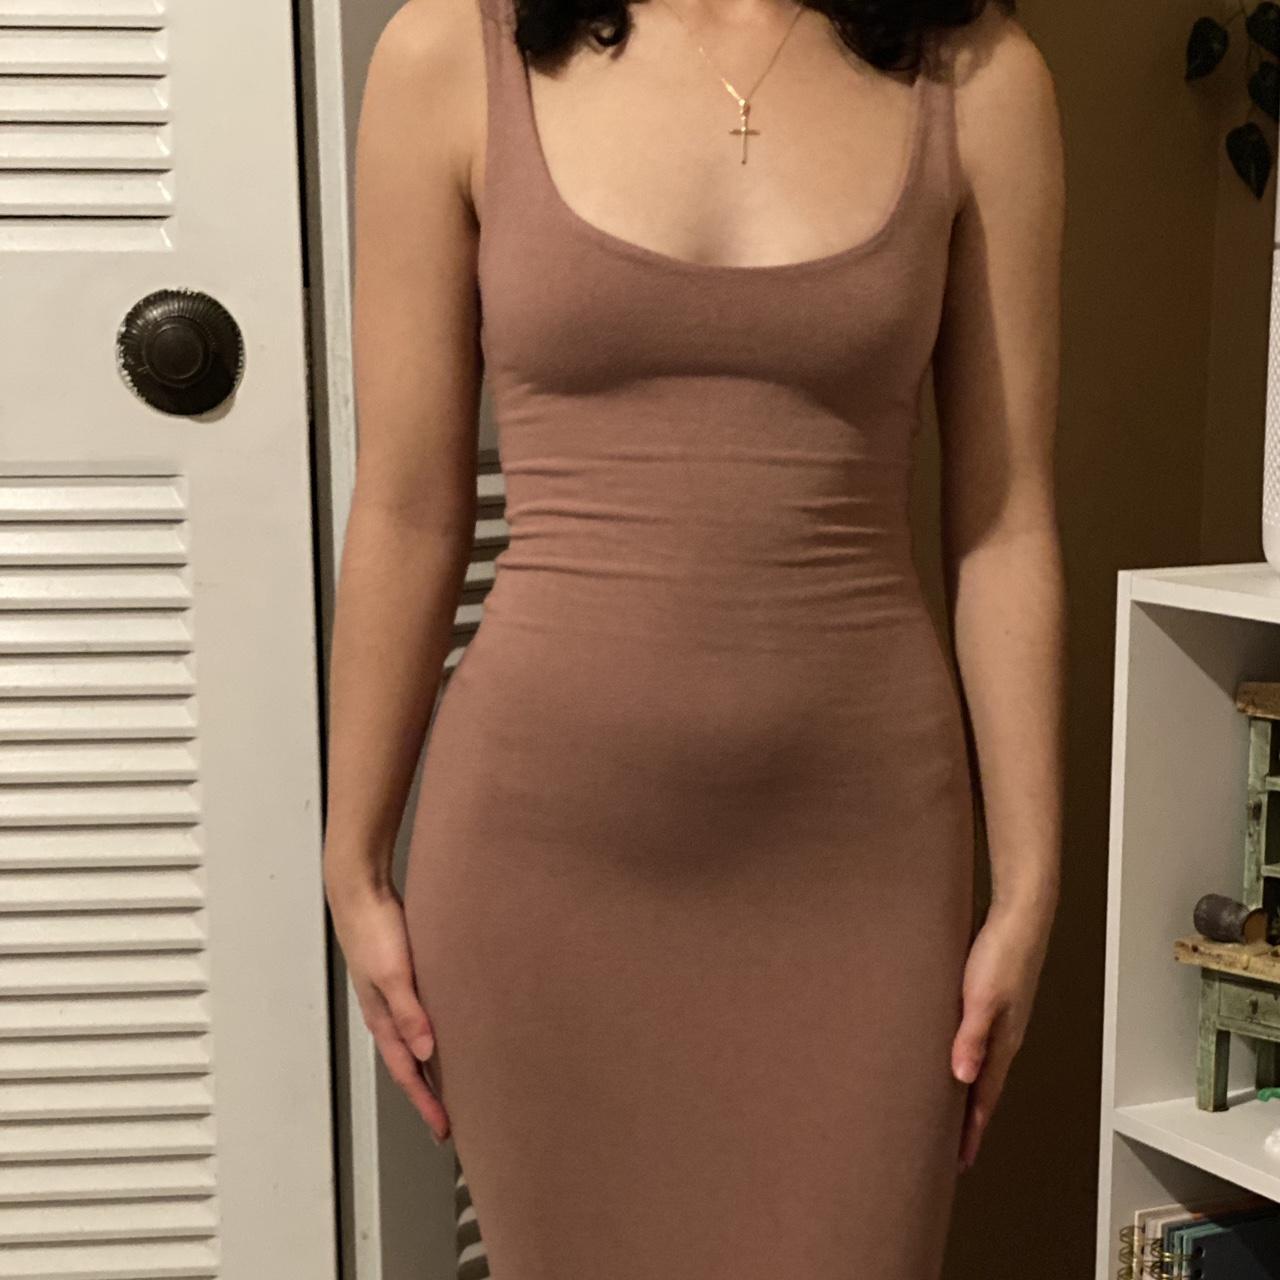 Naked wardrobe “the nw hourglass midi dress” in the - Depop